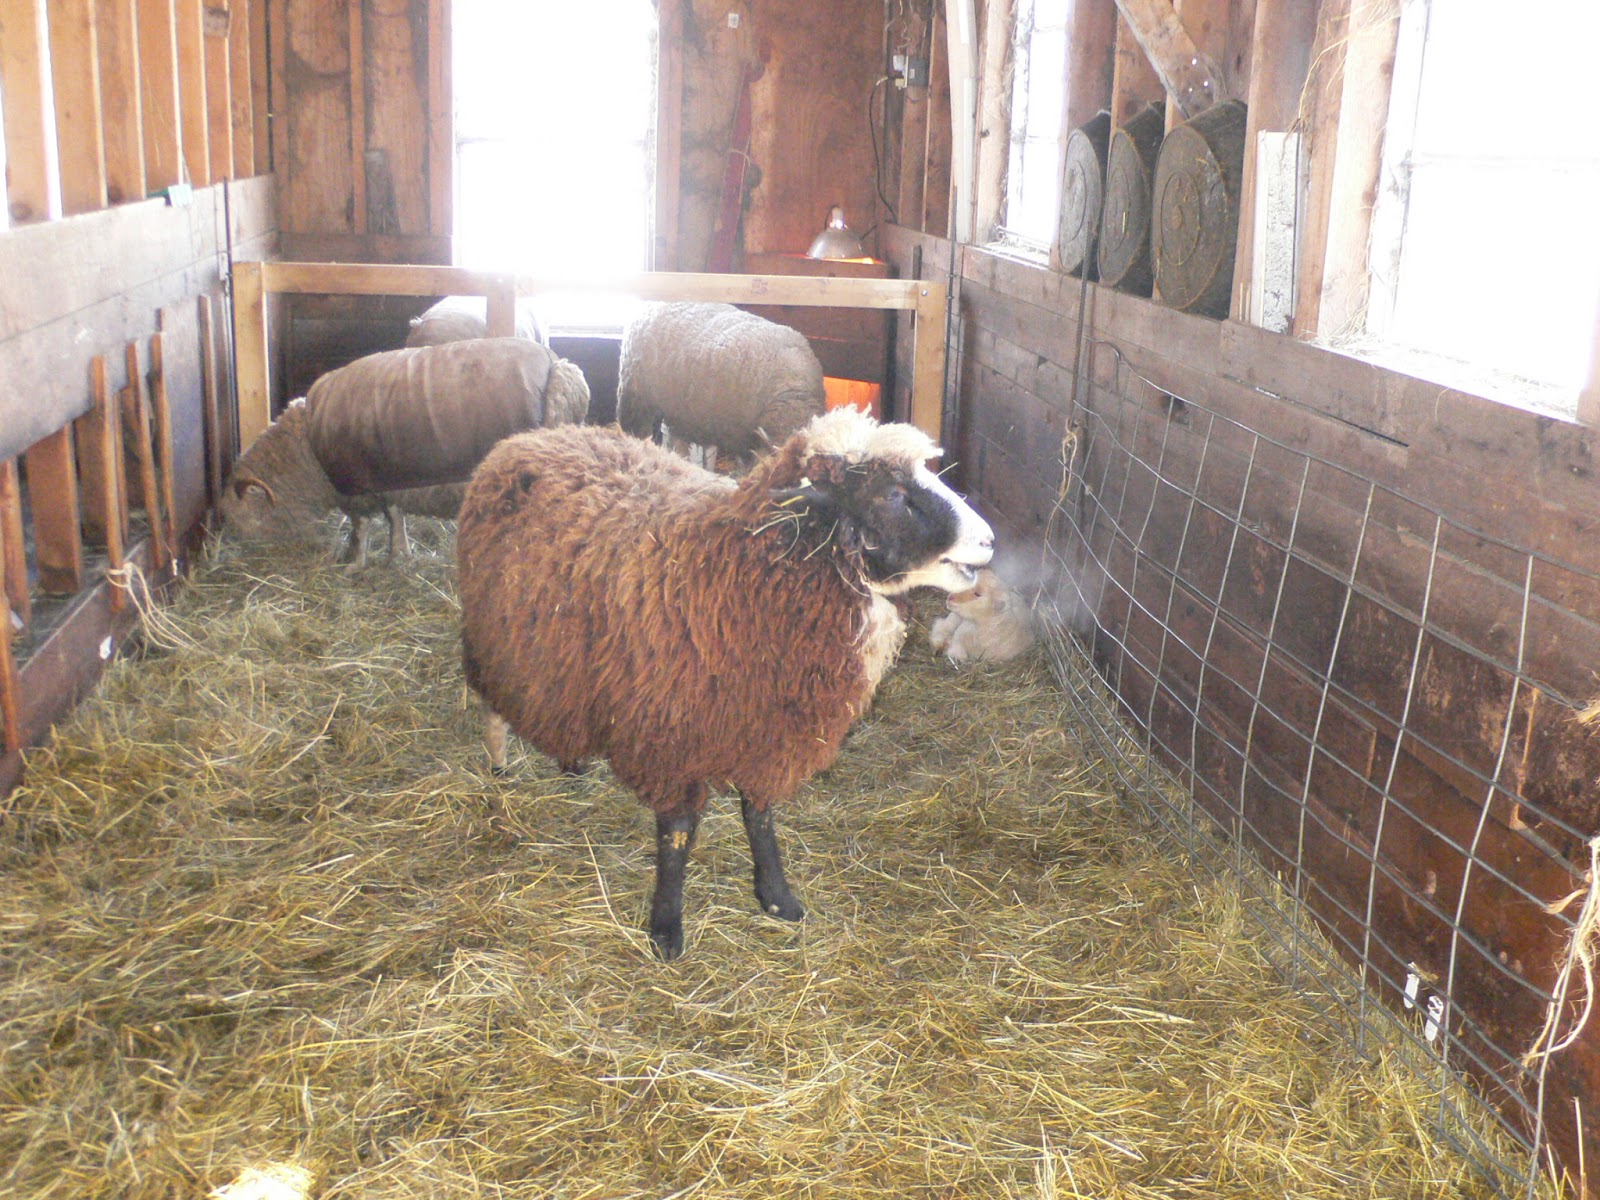 Ewe & I Farm: More sheep and lamb pictures